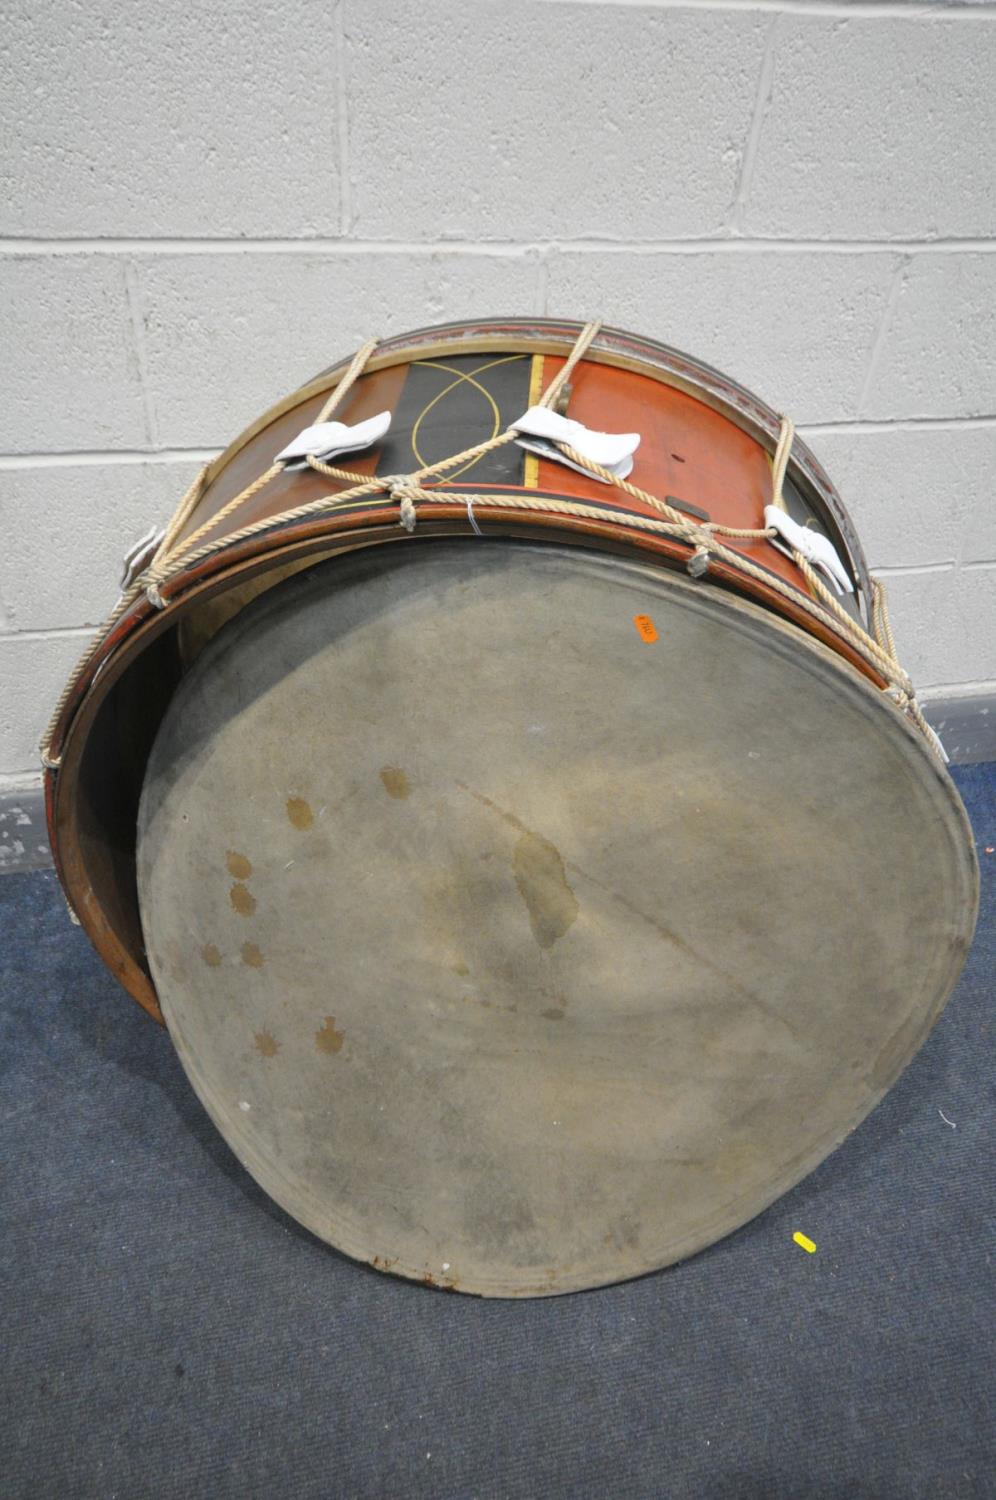 A LARGE MILITARY REGIMENTAL DRUM, approximately 88cm diameter x 40cm deep, the drum skin one side